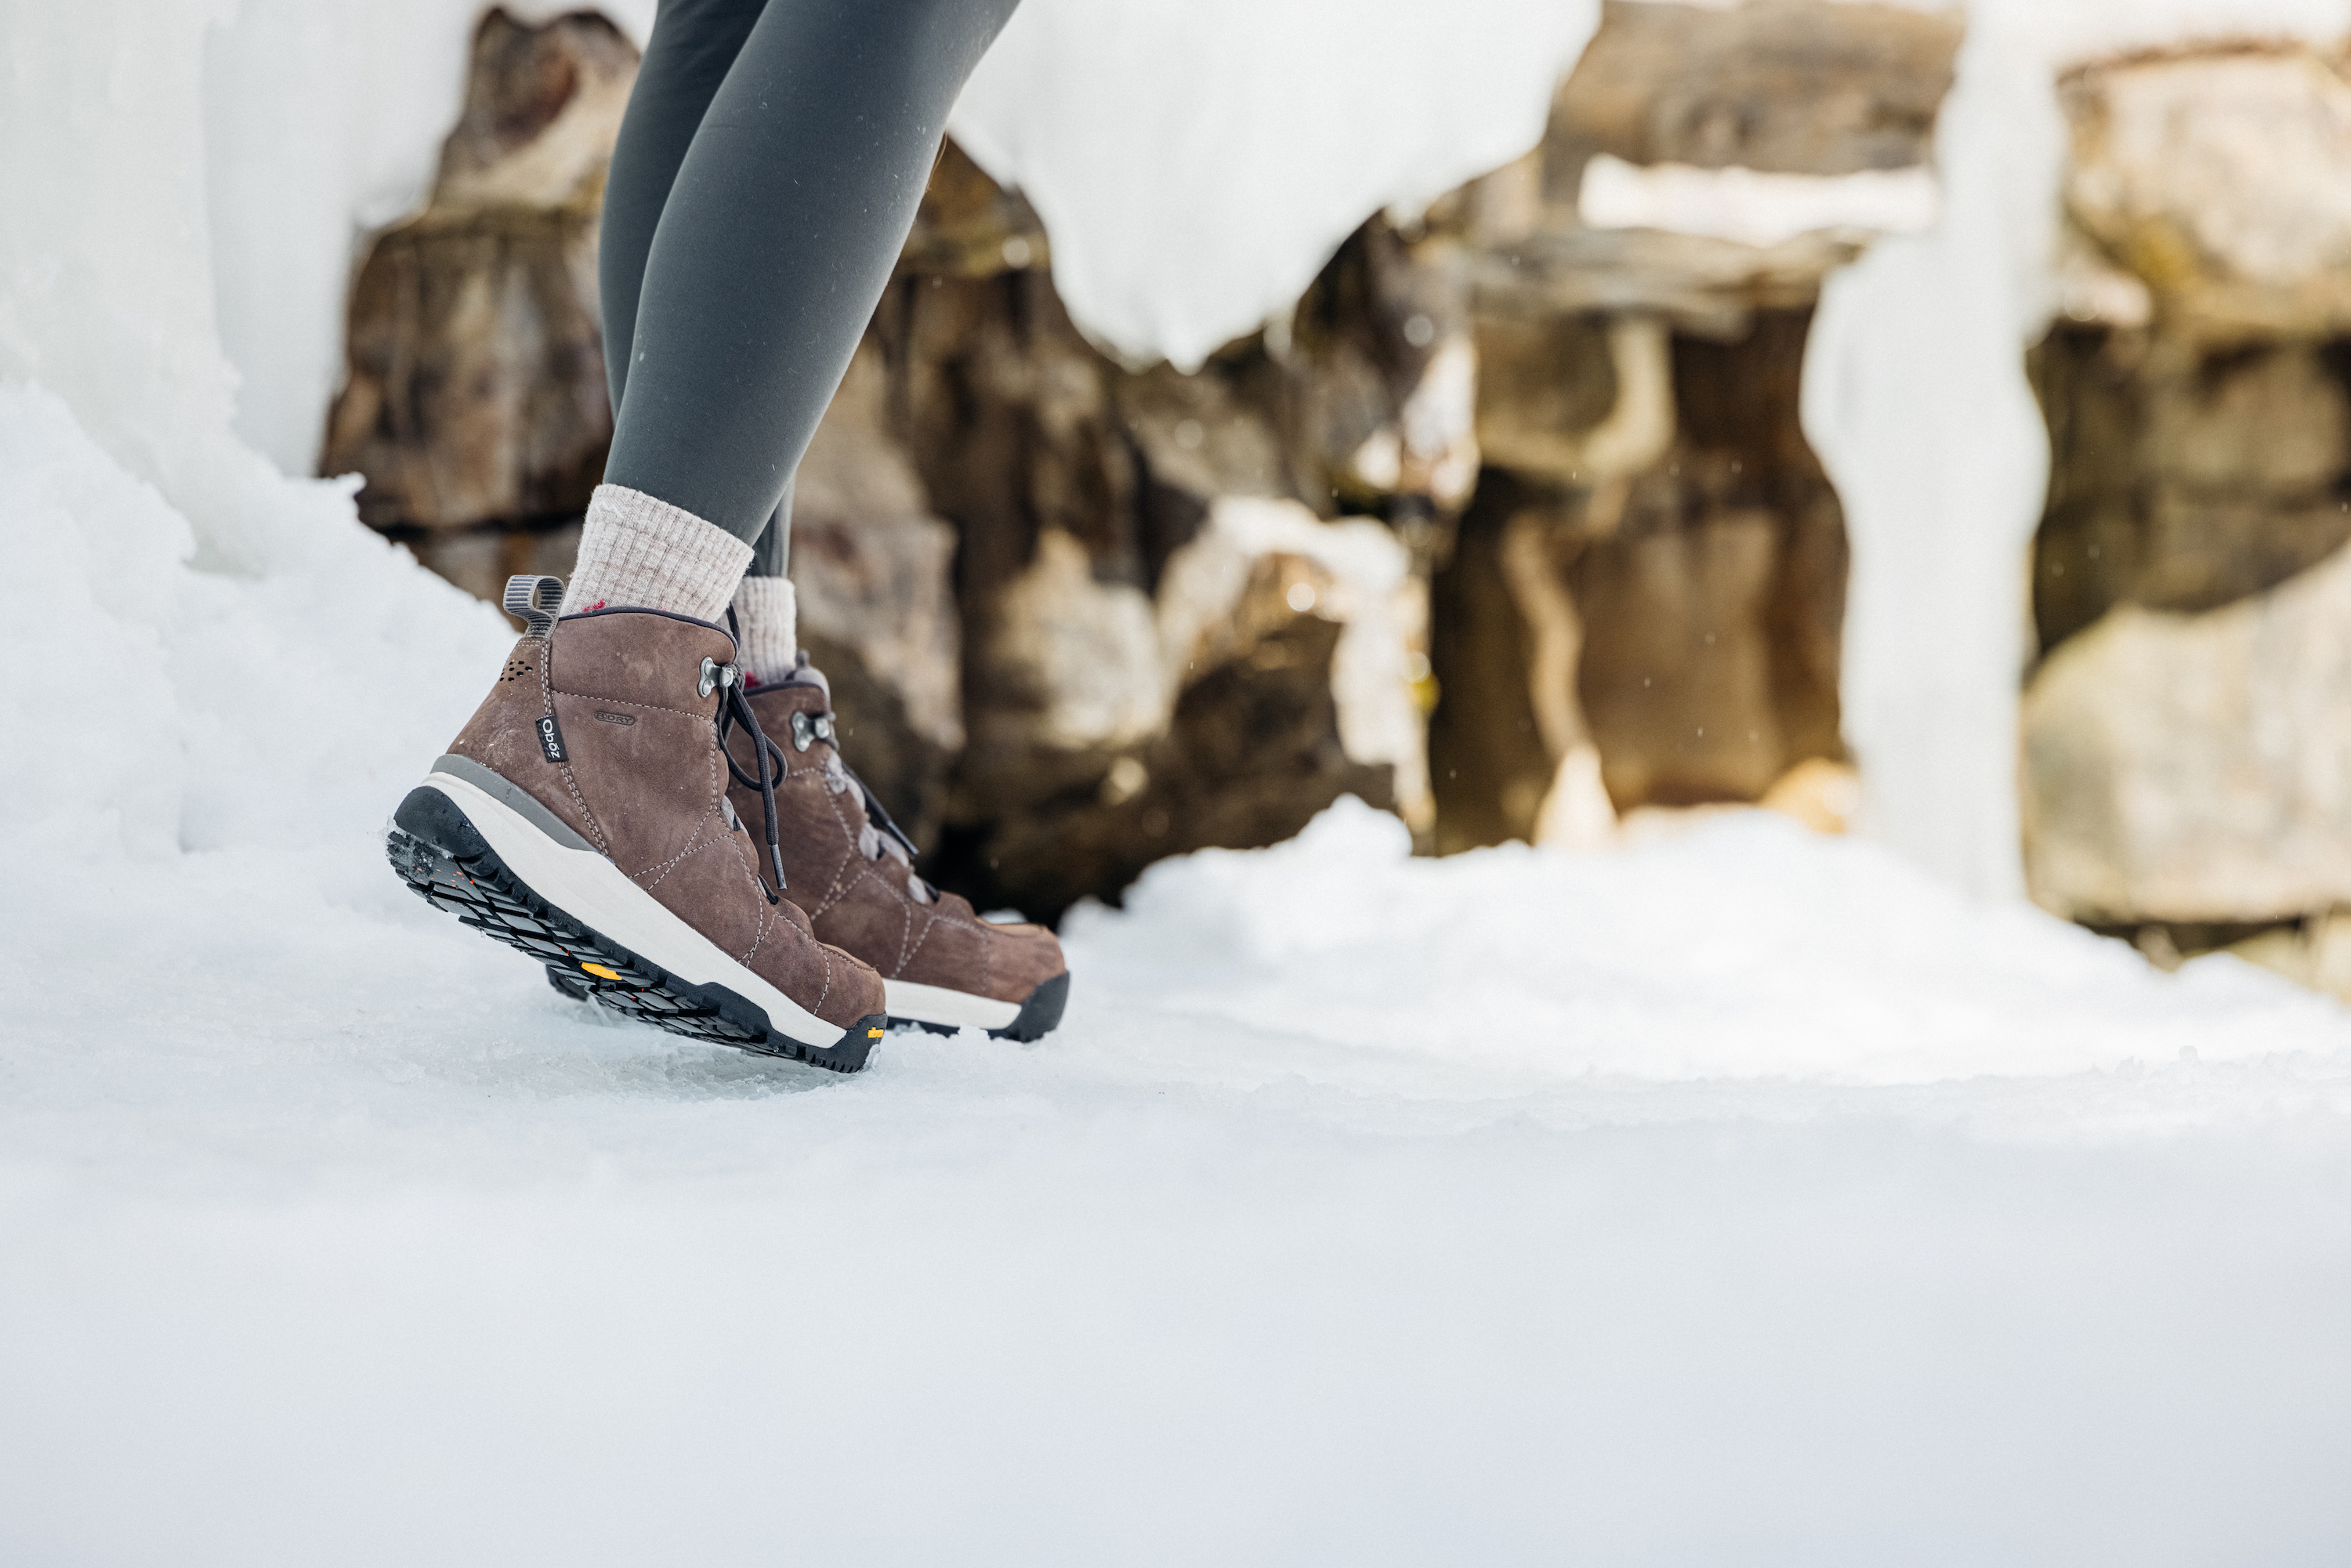 The Oboz  Women's Sphinx Mid Insulated boot on an icy winter trail.